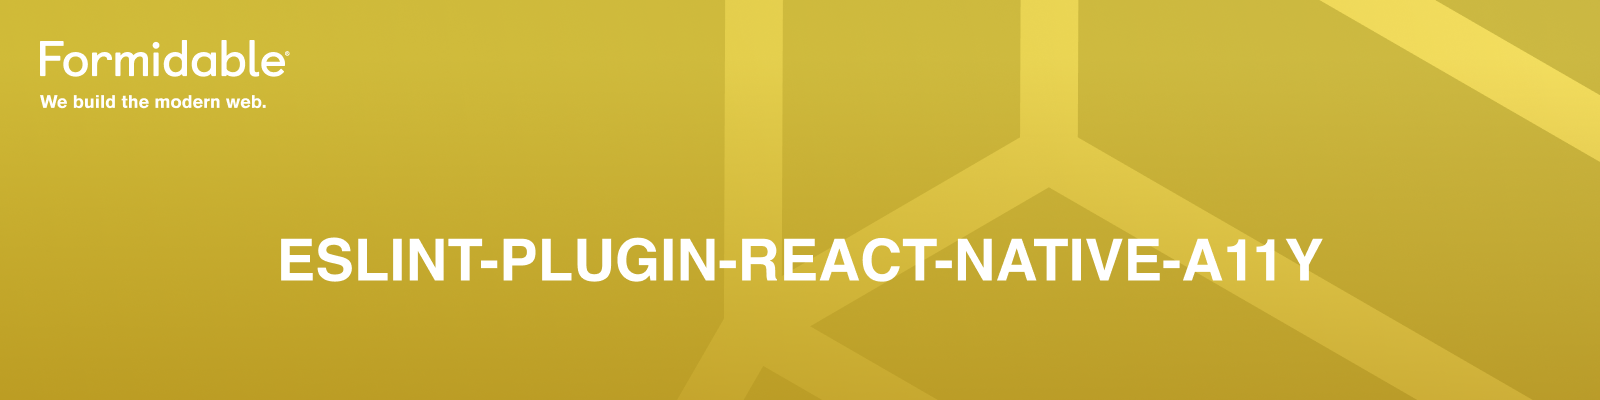 Eslint-plugin-react-native-a11y — Formidable, We build the modern web